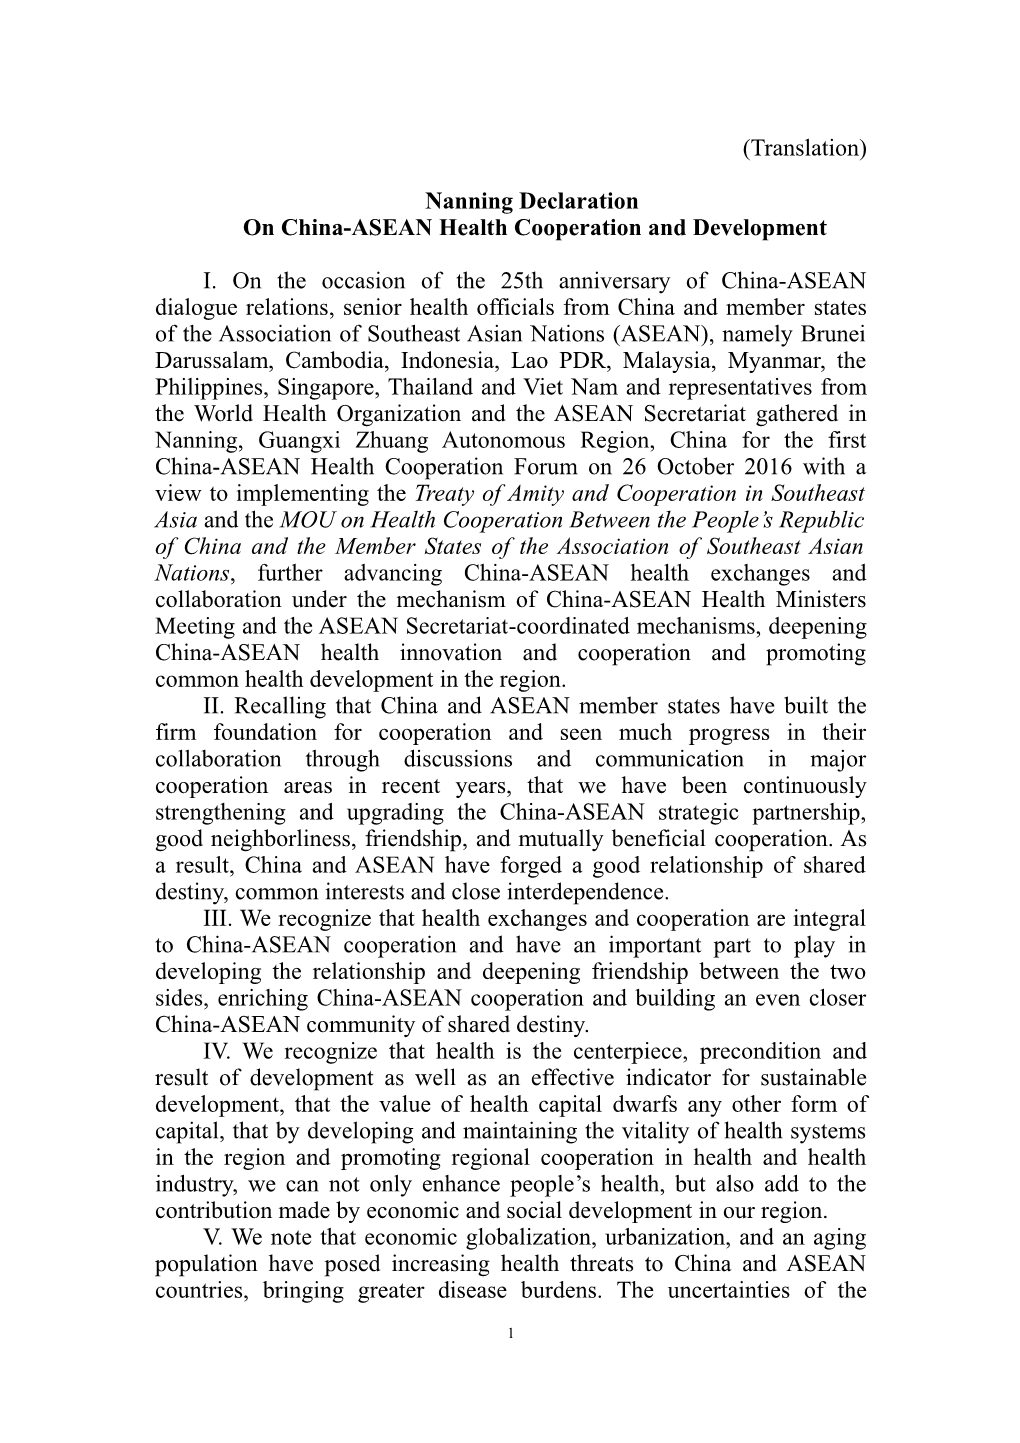 On China-ASEAN Health Cooperation and Development